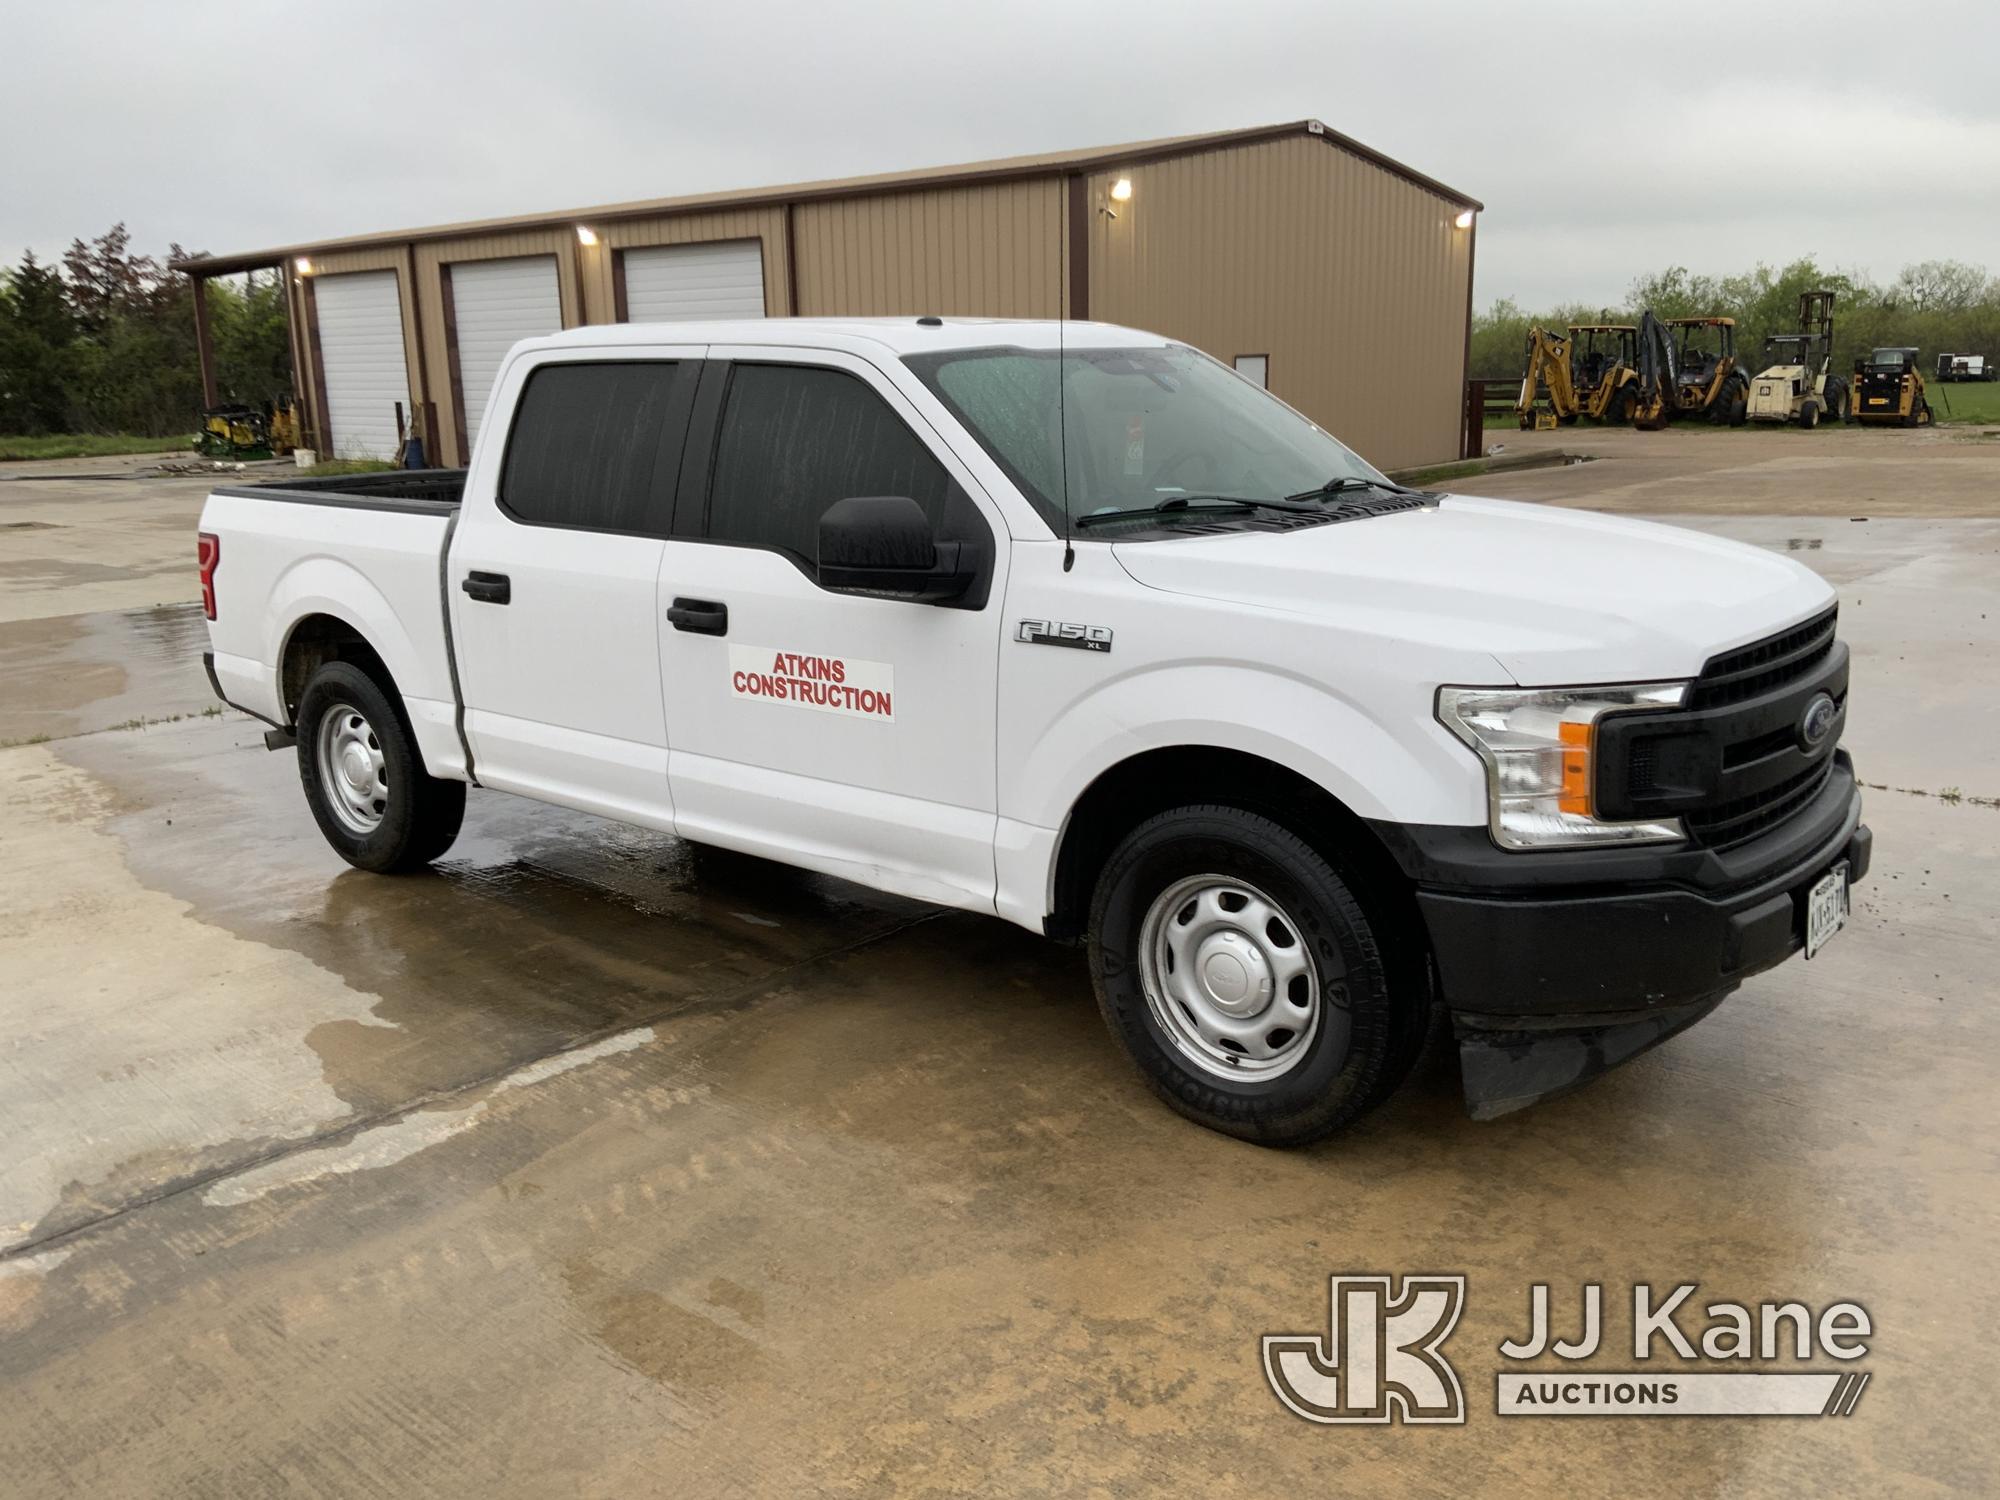 (Midlothian, TX) 2019 Ford F150 Crew-Cab Pickup Truck Runs. Moves. Cracked windshield. Body damage